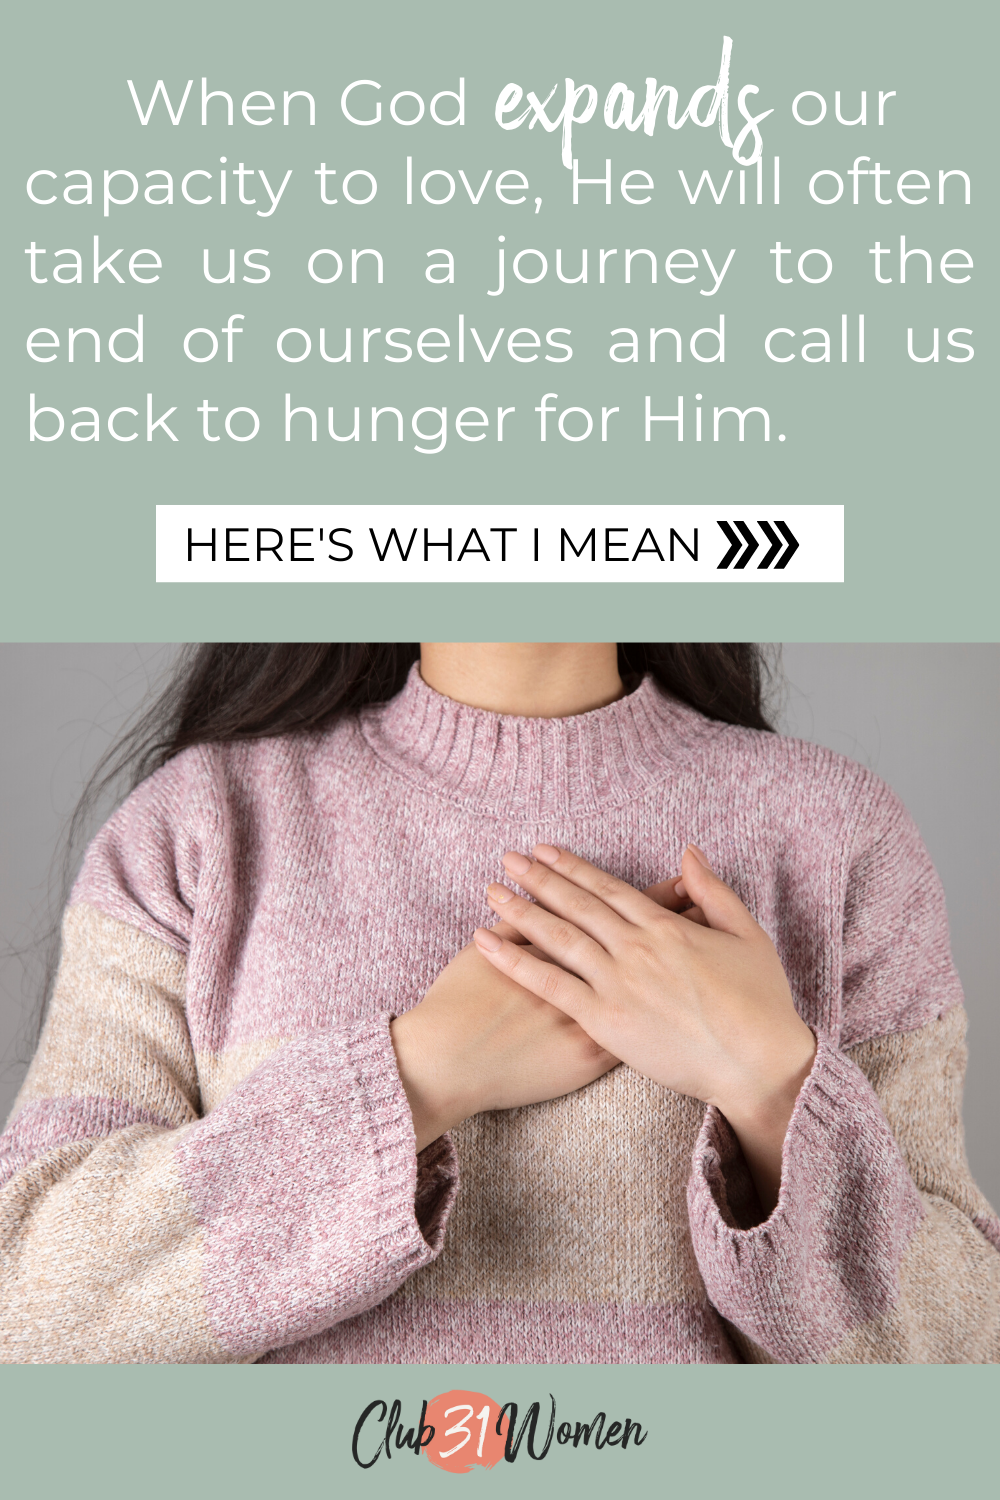 Breaking Free from Unforgiveness: A Journey to Expand Our Capacity to Love via @Club31Women